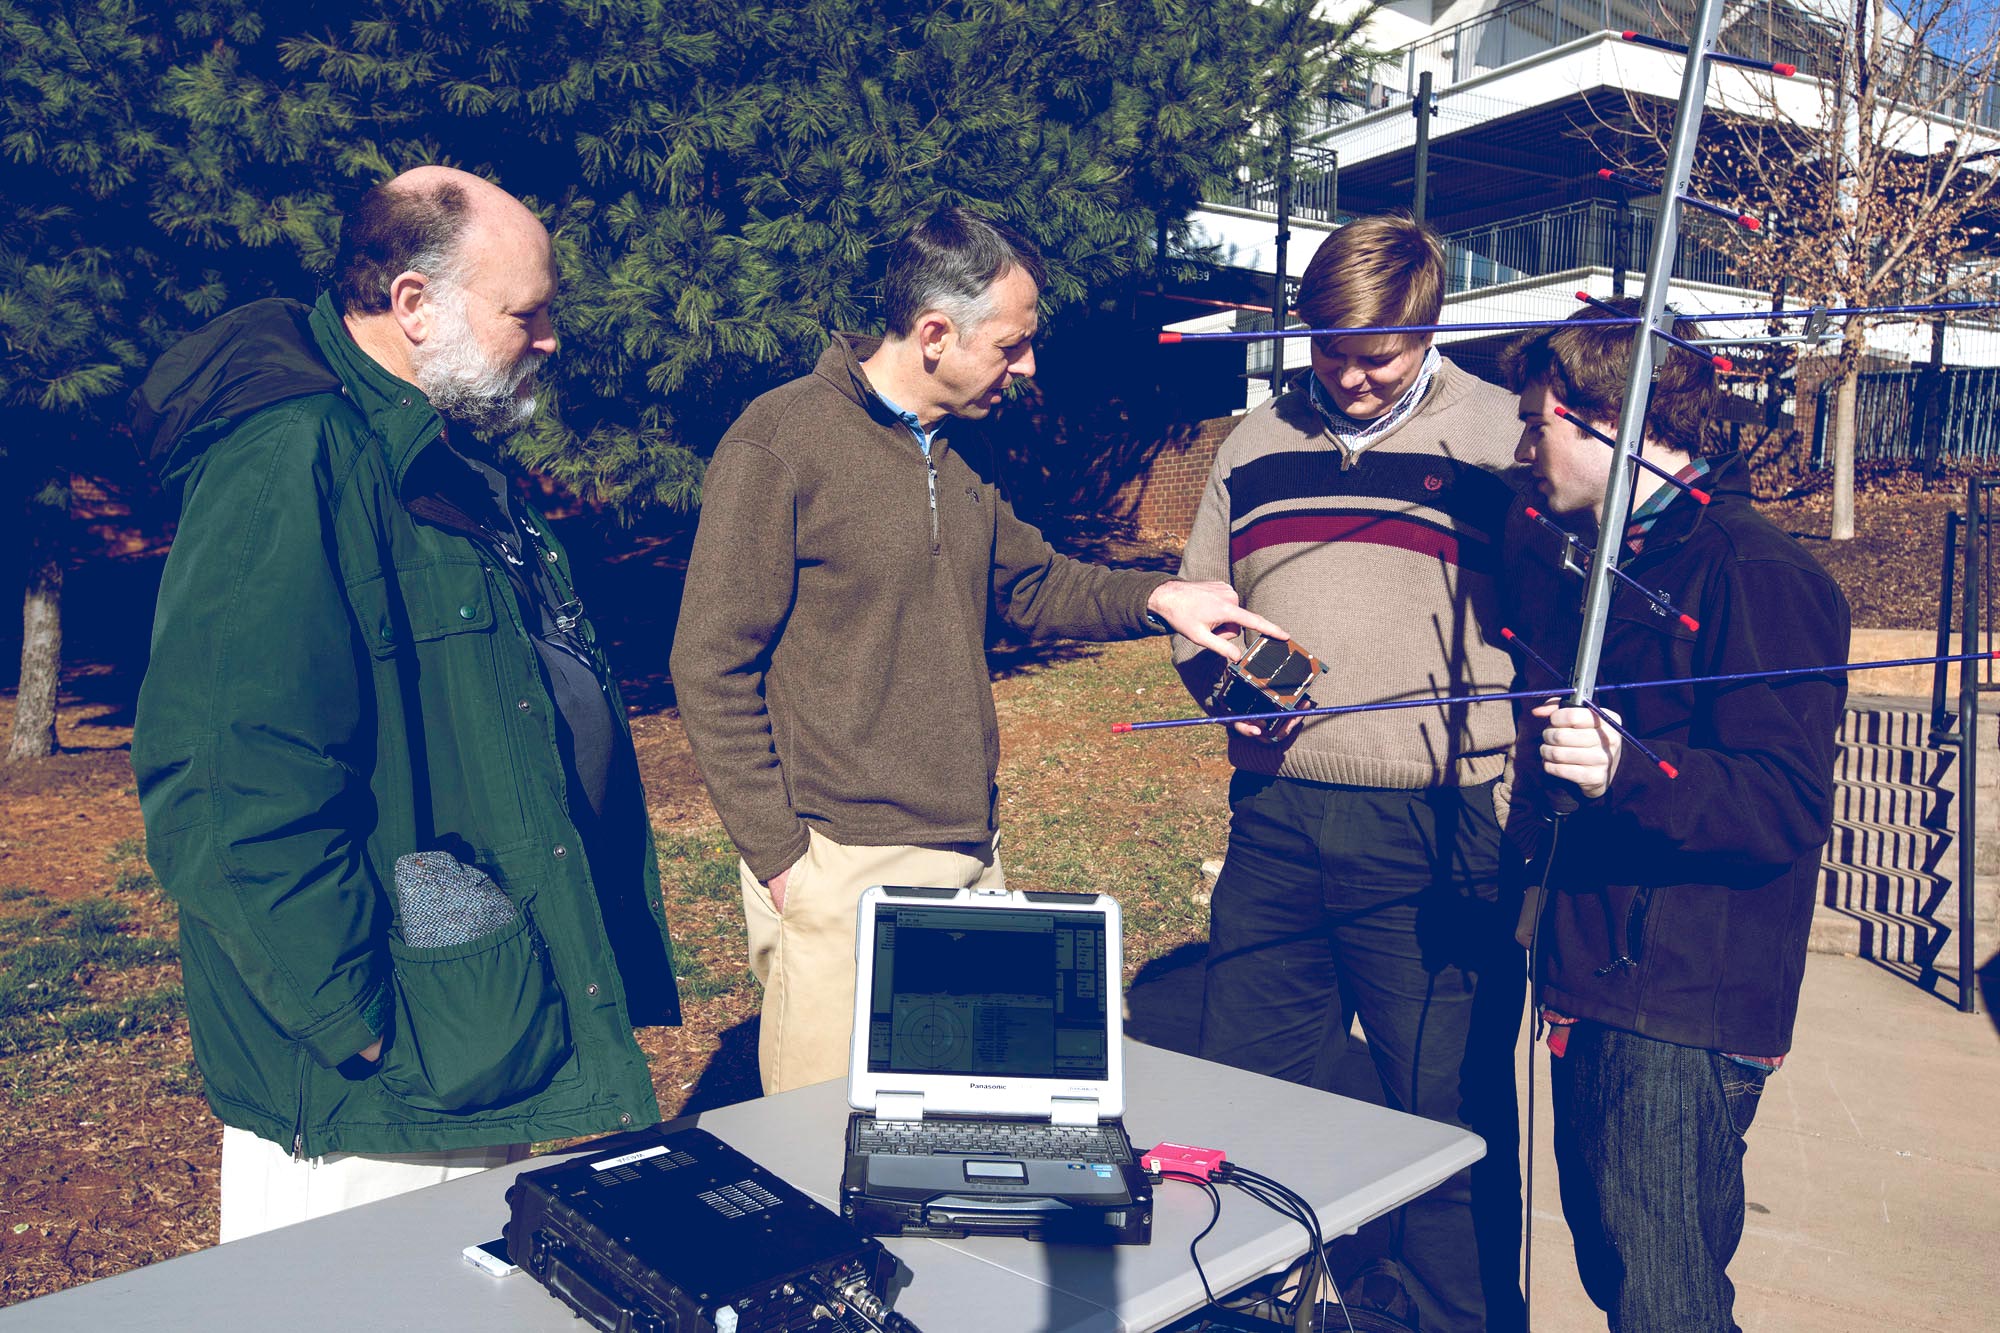 Amateur radio club trustee Michael McPherson, left, Professor Chris Goyne and engineering students Colin Mitchell and Tyler Gabriele, attempt to track a satellite using a UHF radio and hand-held antenna.